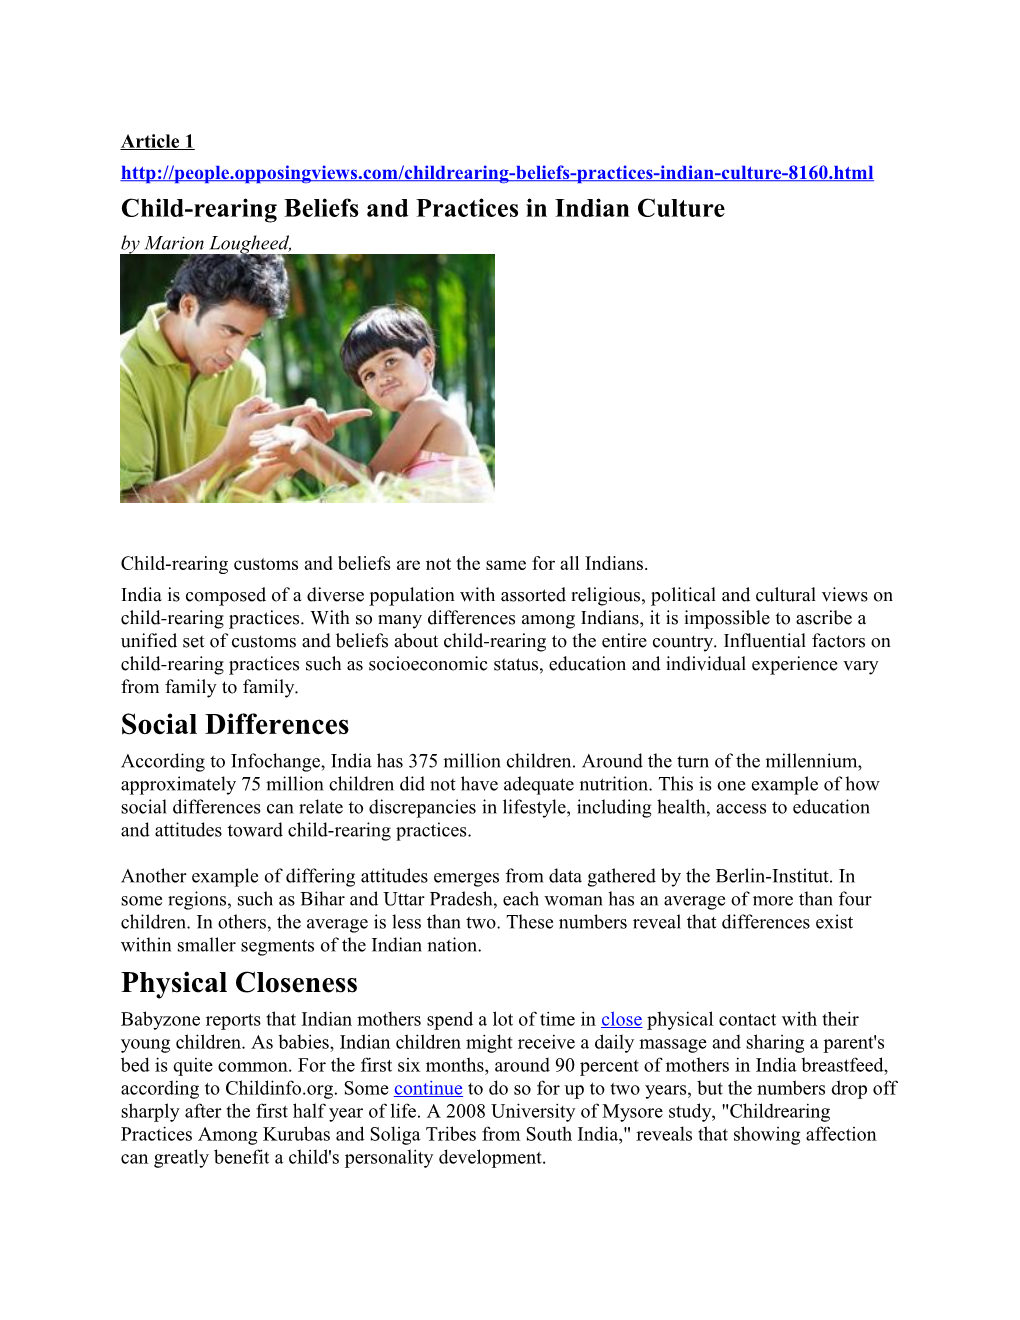 Child-Rearing Beliefs and Practices in Indian Culture